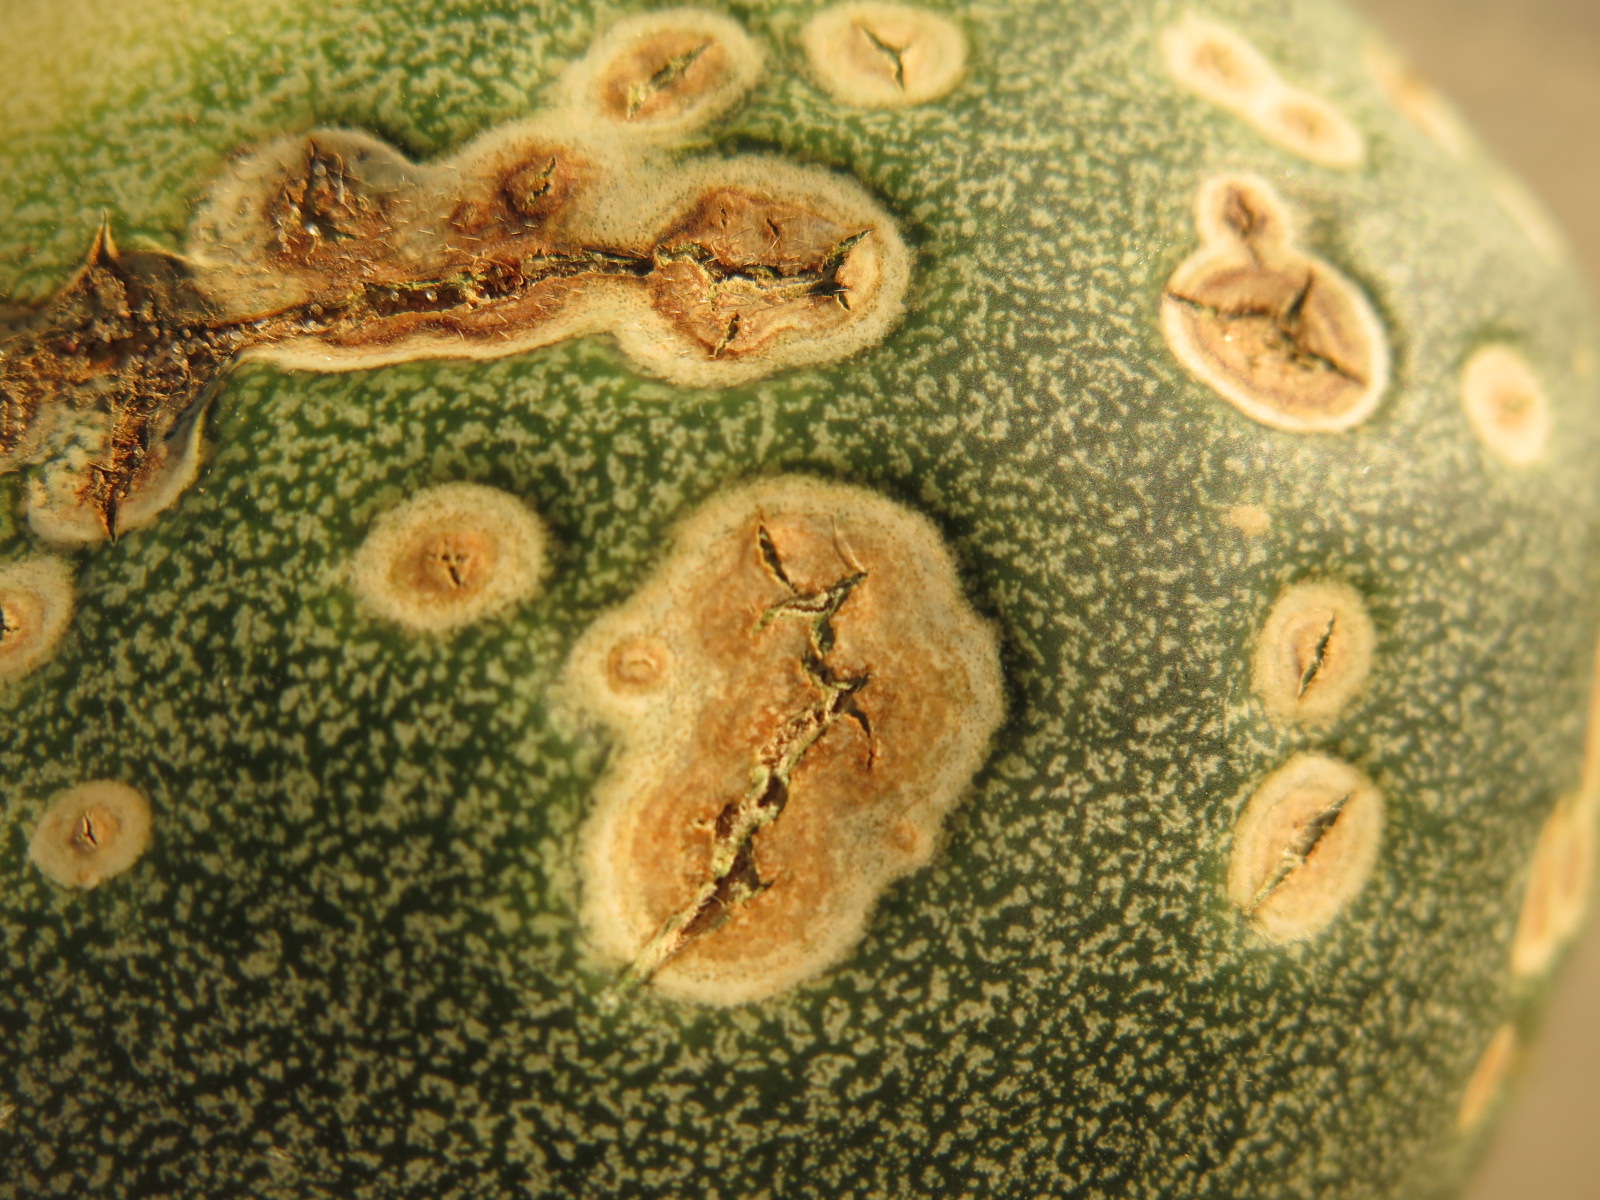 Figure 3. Advanced lesions of anthracnose on cantaloupe fruit. Note cracked appearance.